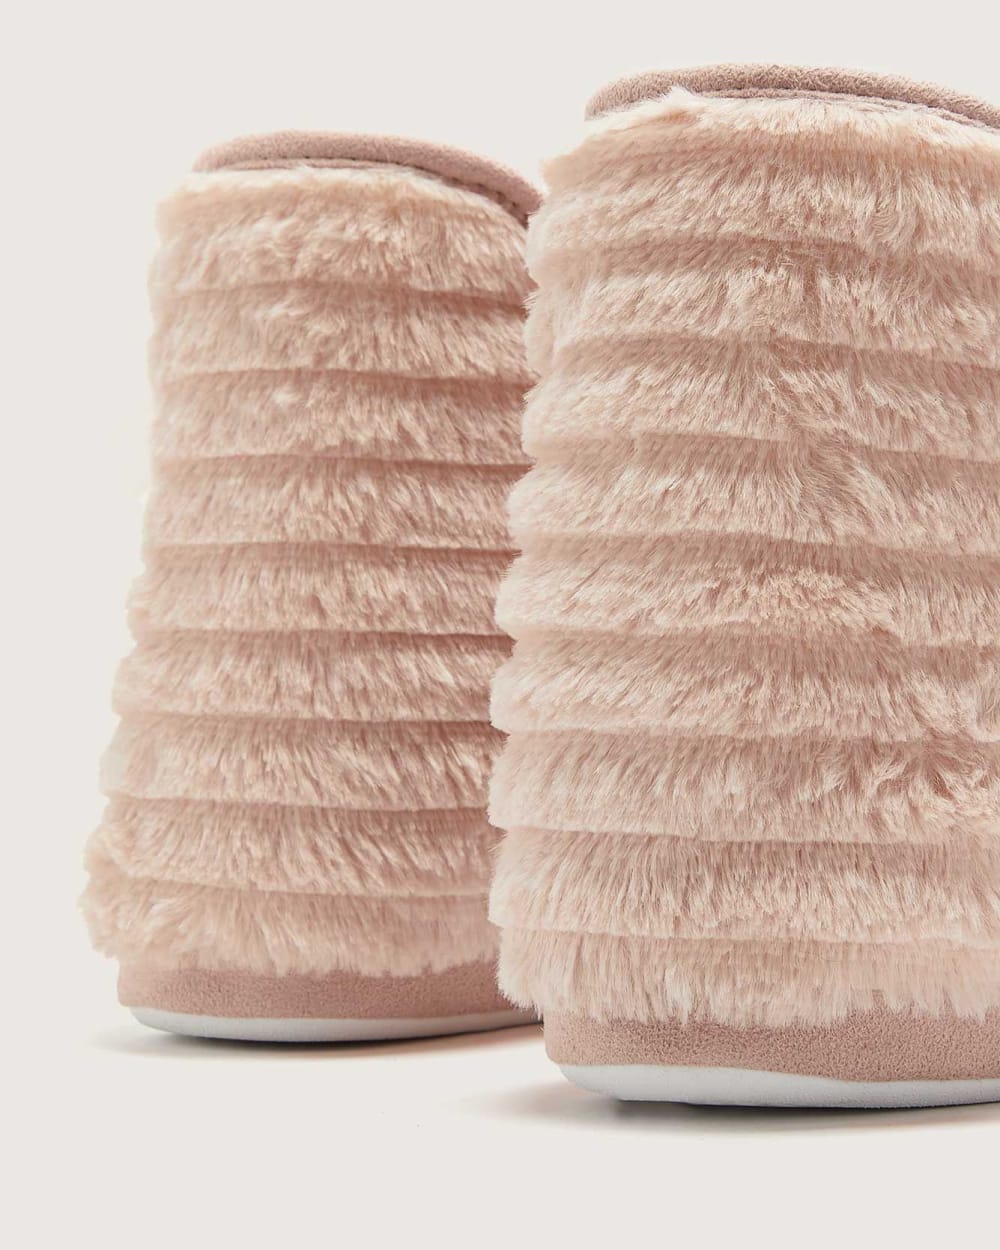 Extra Wide Width, Slipper Booties - In Every Story